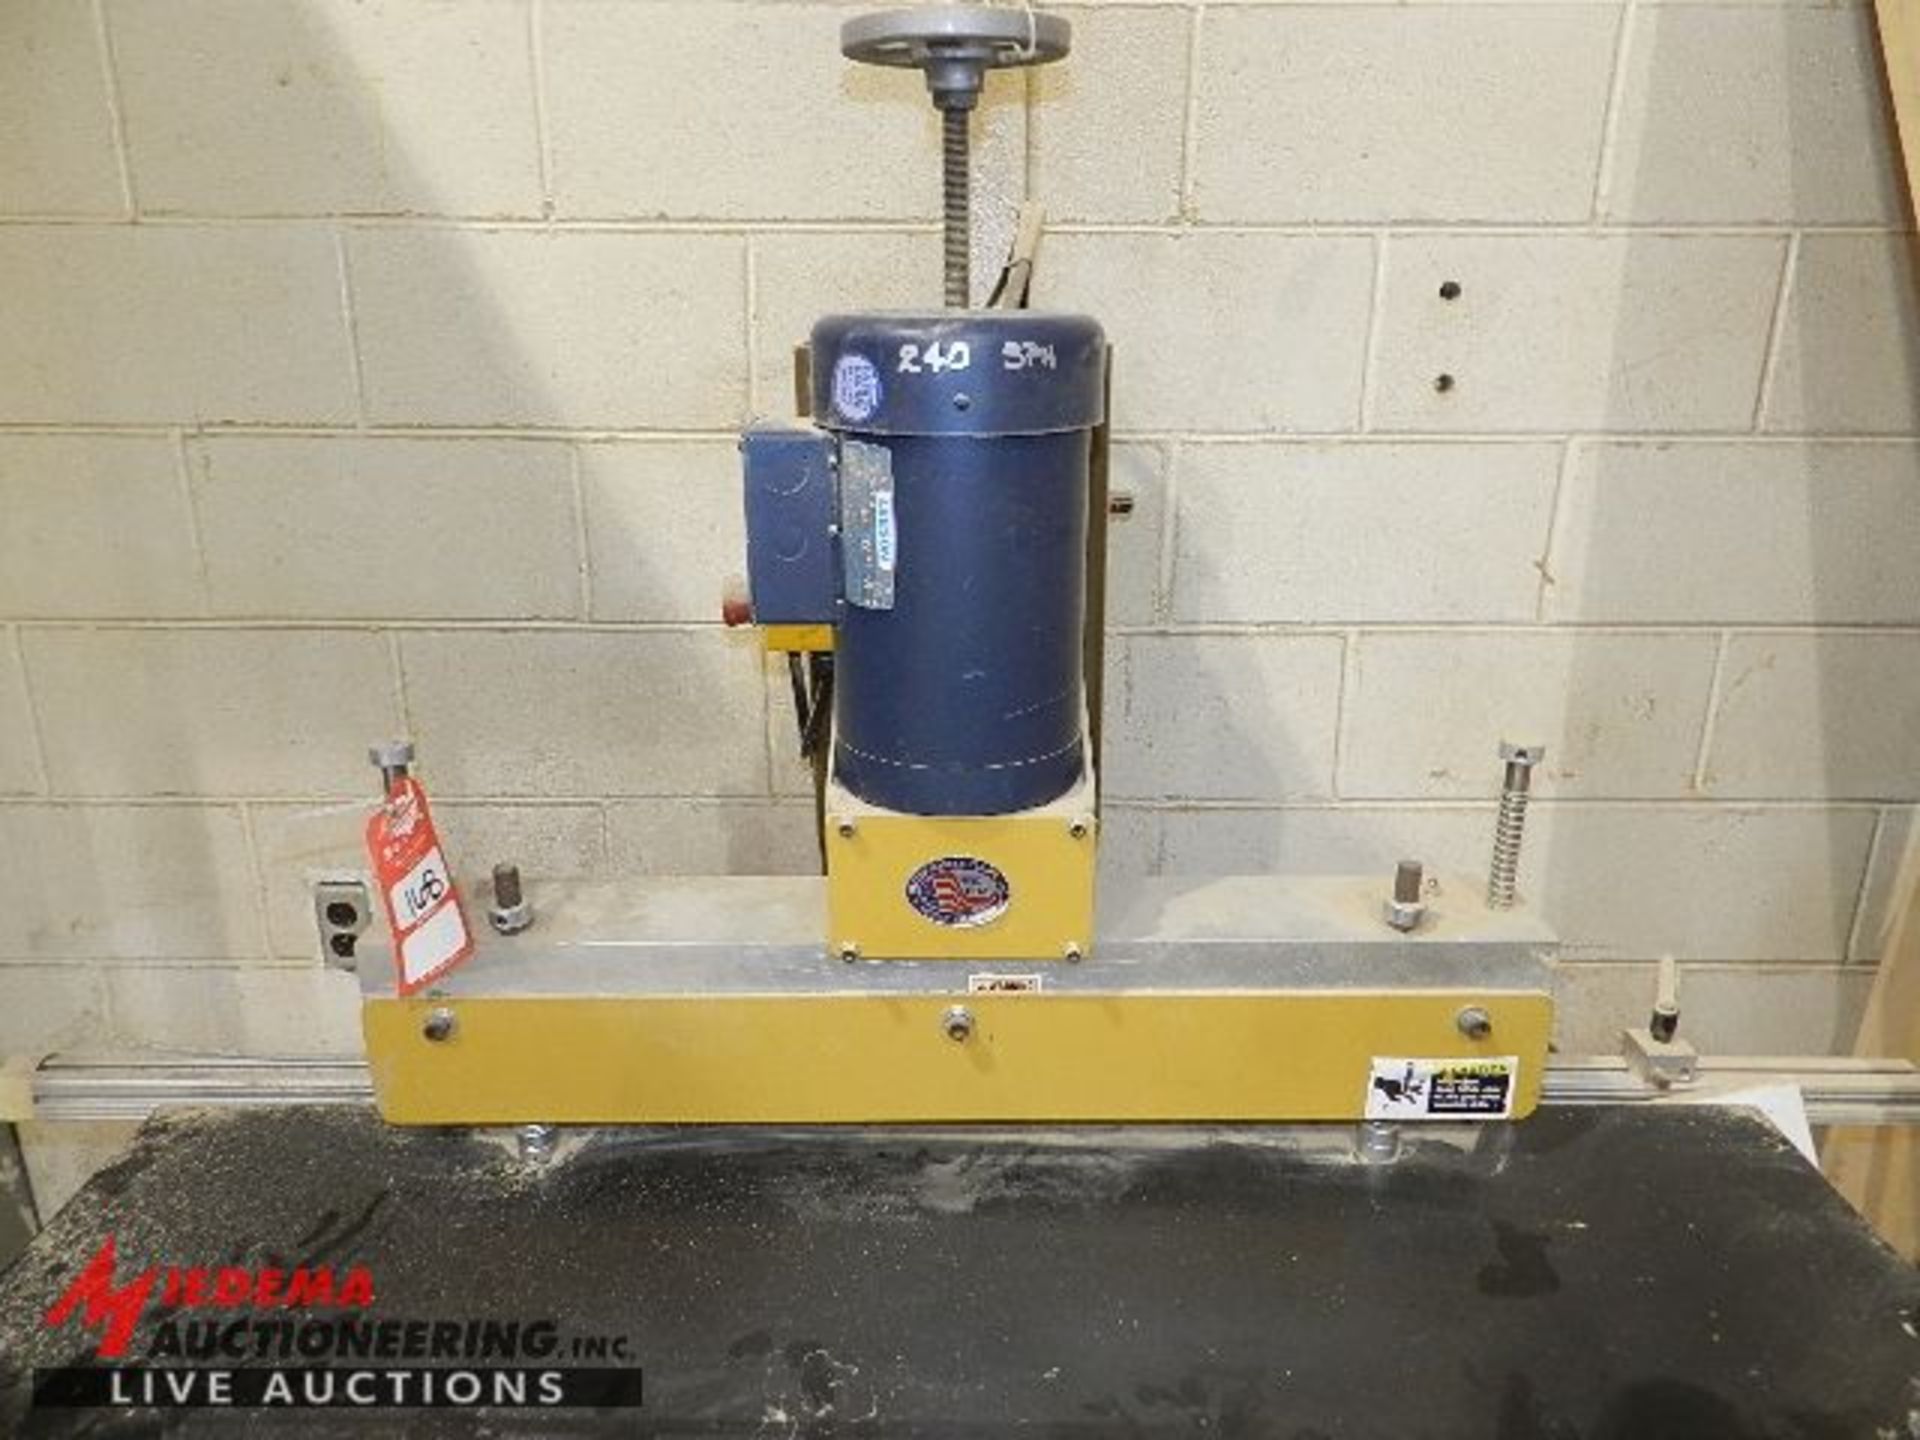 RITTER R19F3 BORING MACHINE ROW LINE DRILL, 32" DRILL HEAD, 230 VOLT, 3 PHASE, S/N 1522 - Image 2 of 4